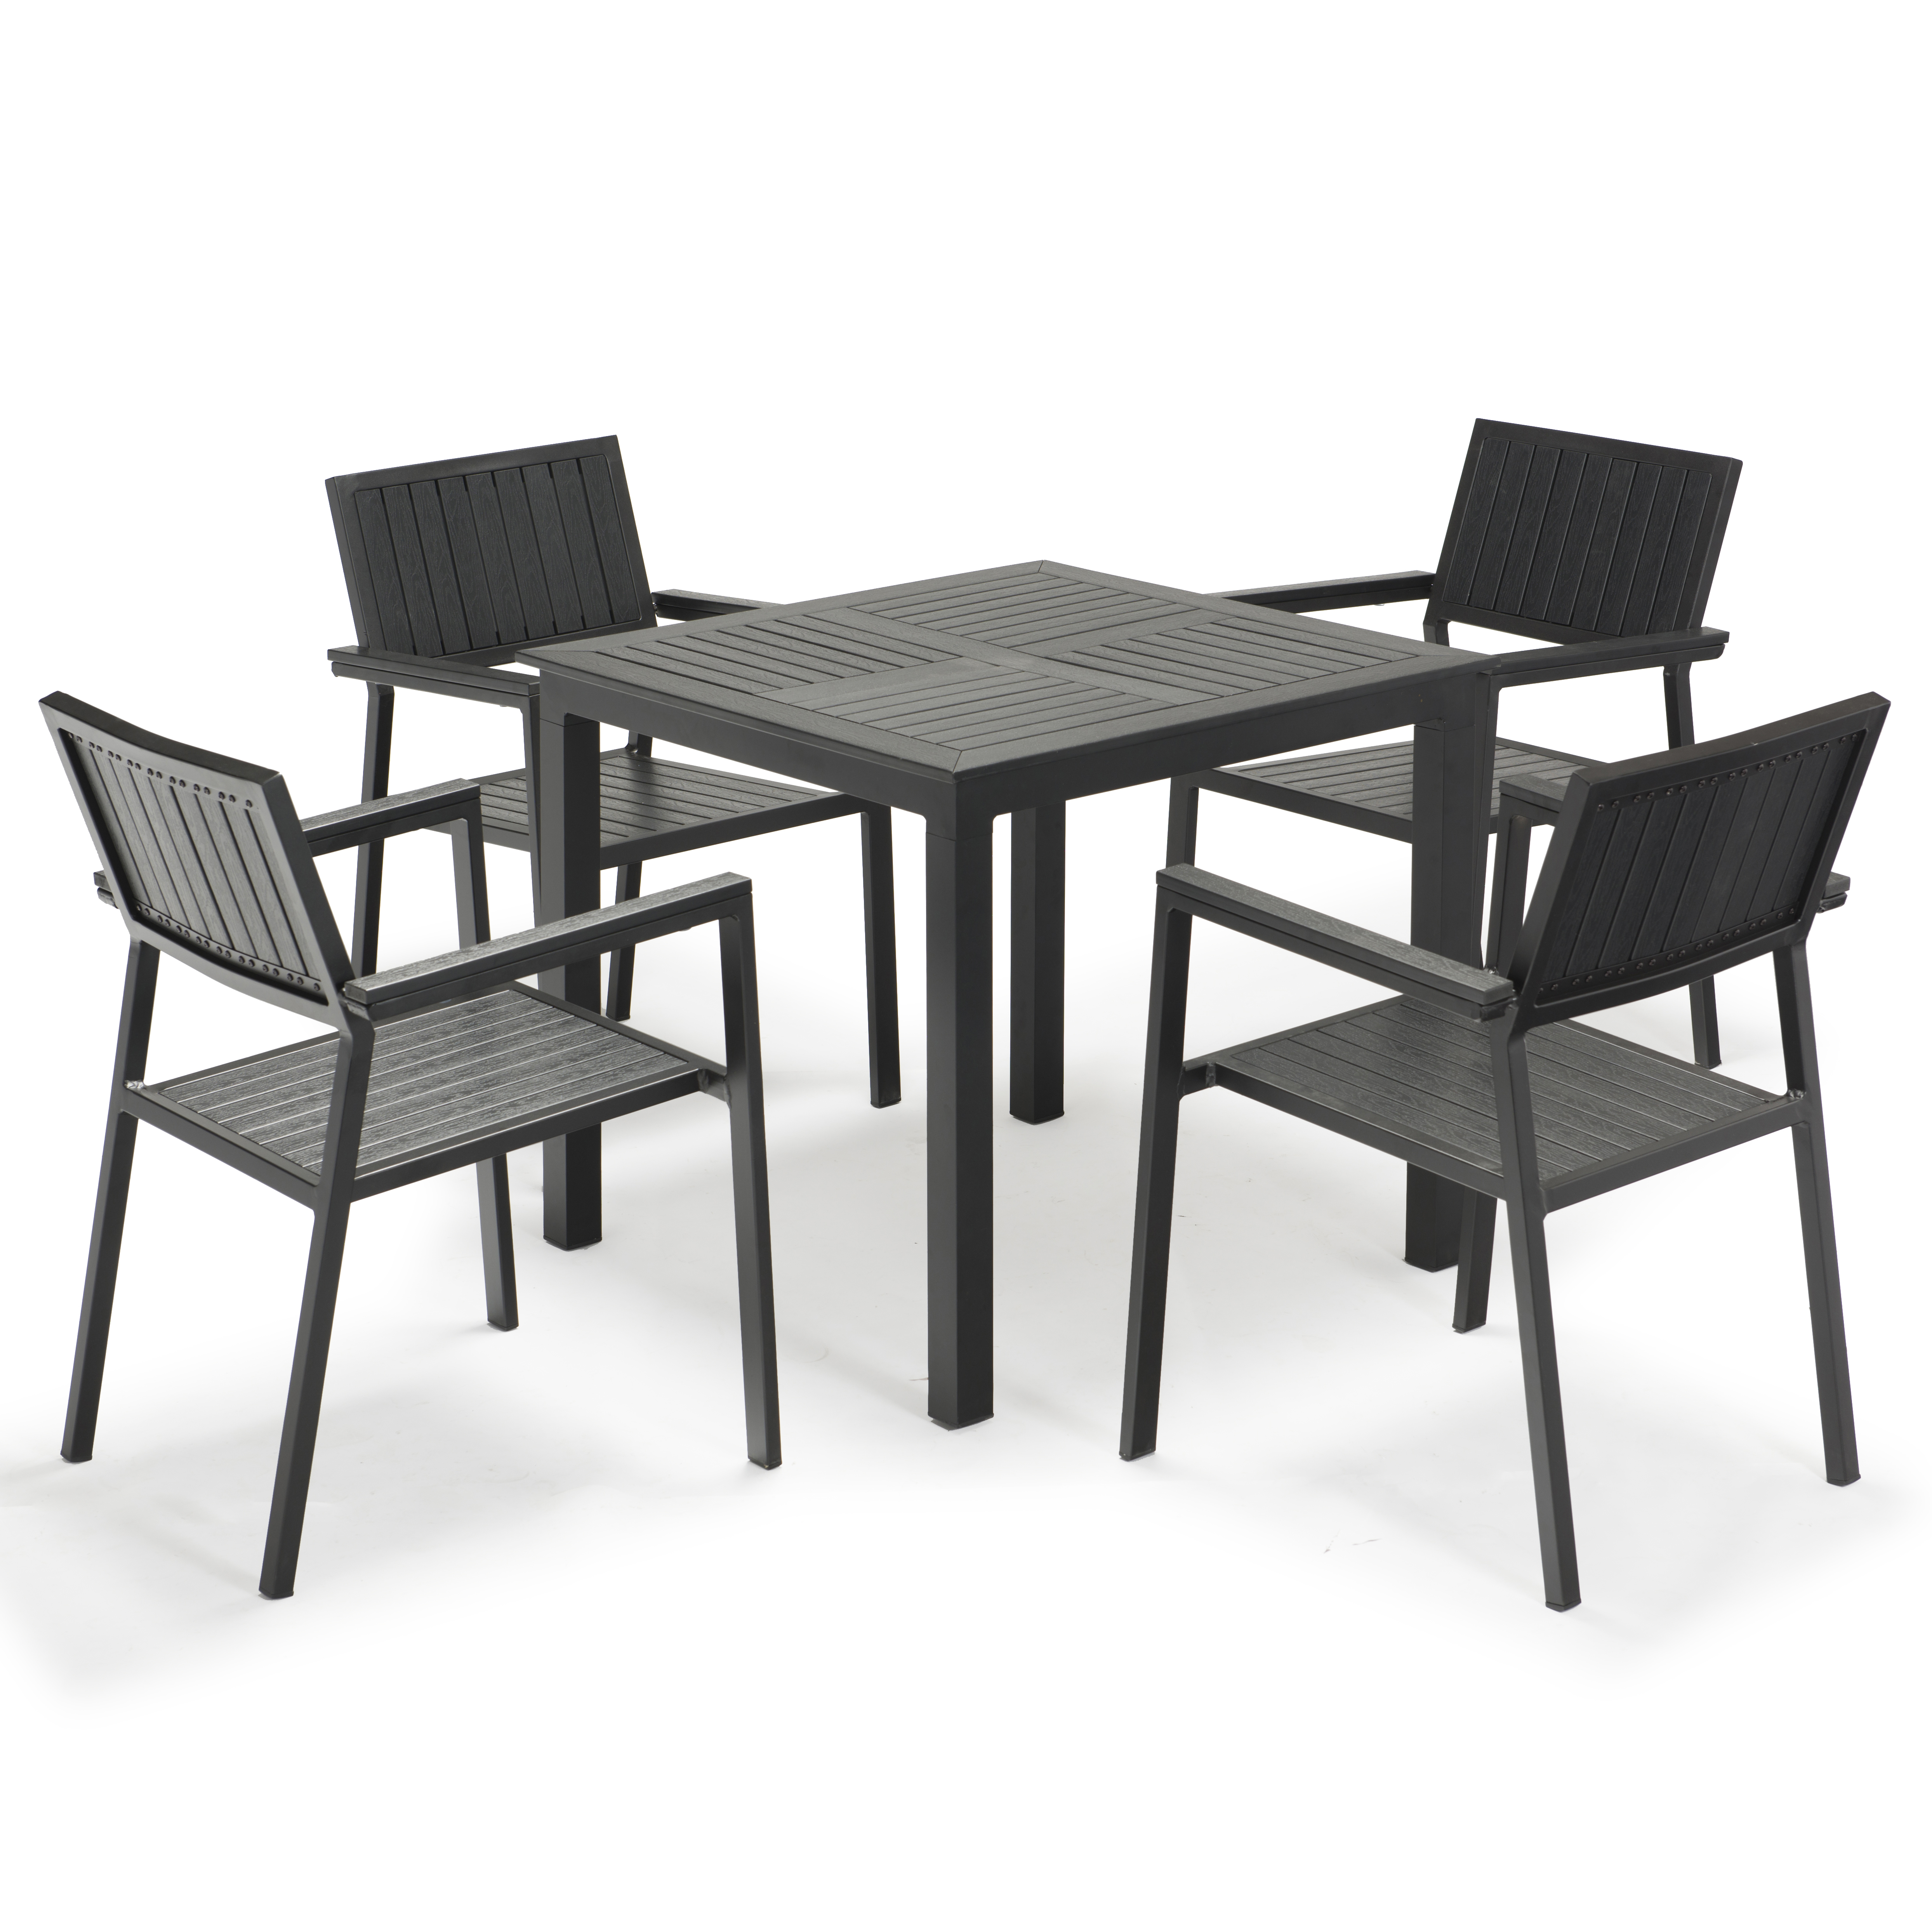 Maintenance and cleaning of outdoor plastic tables and chairs